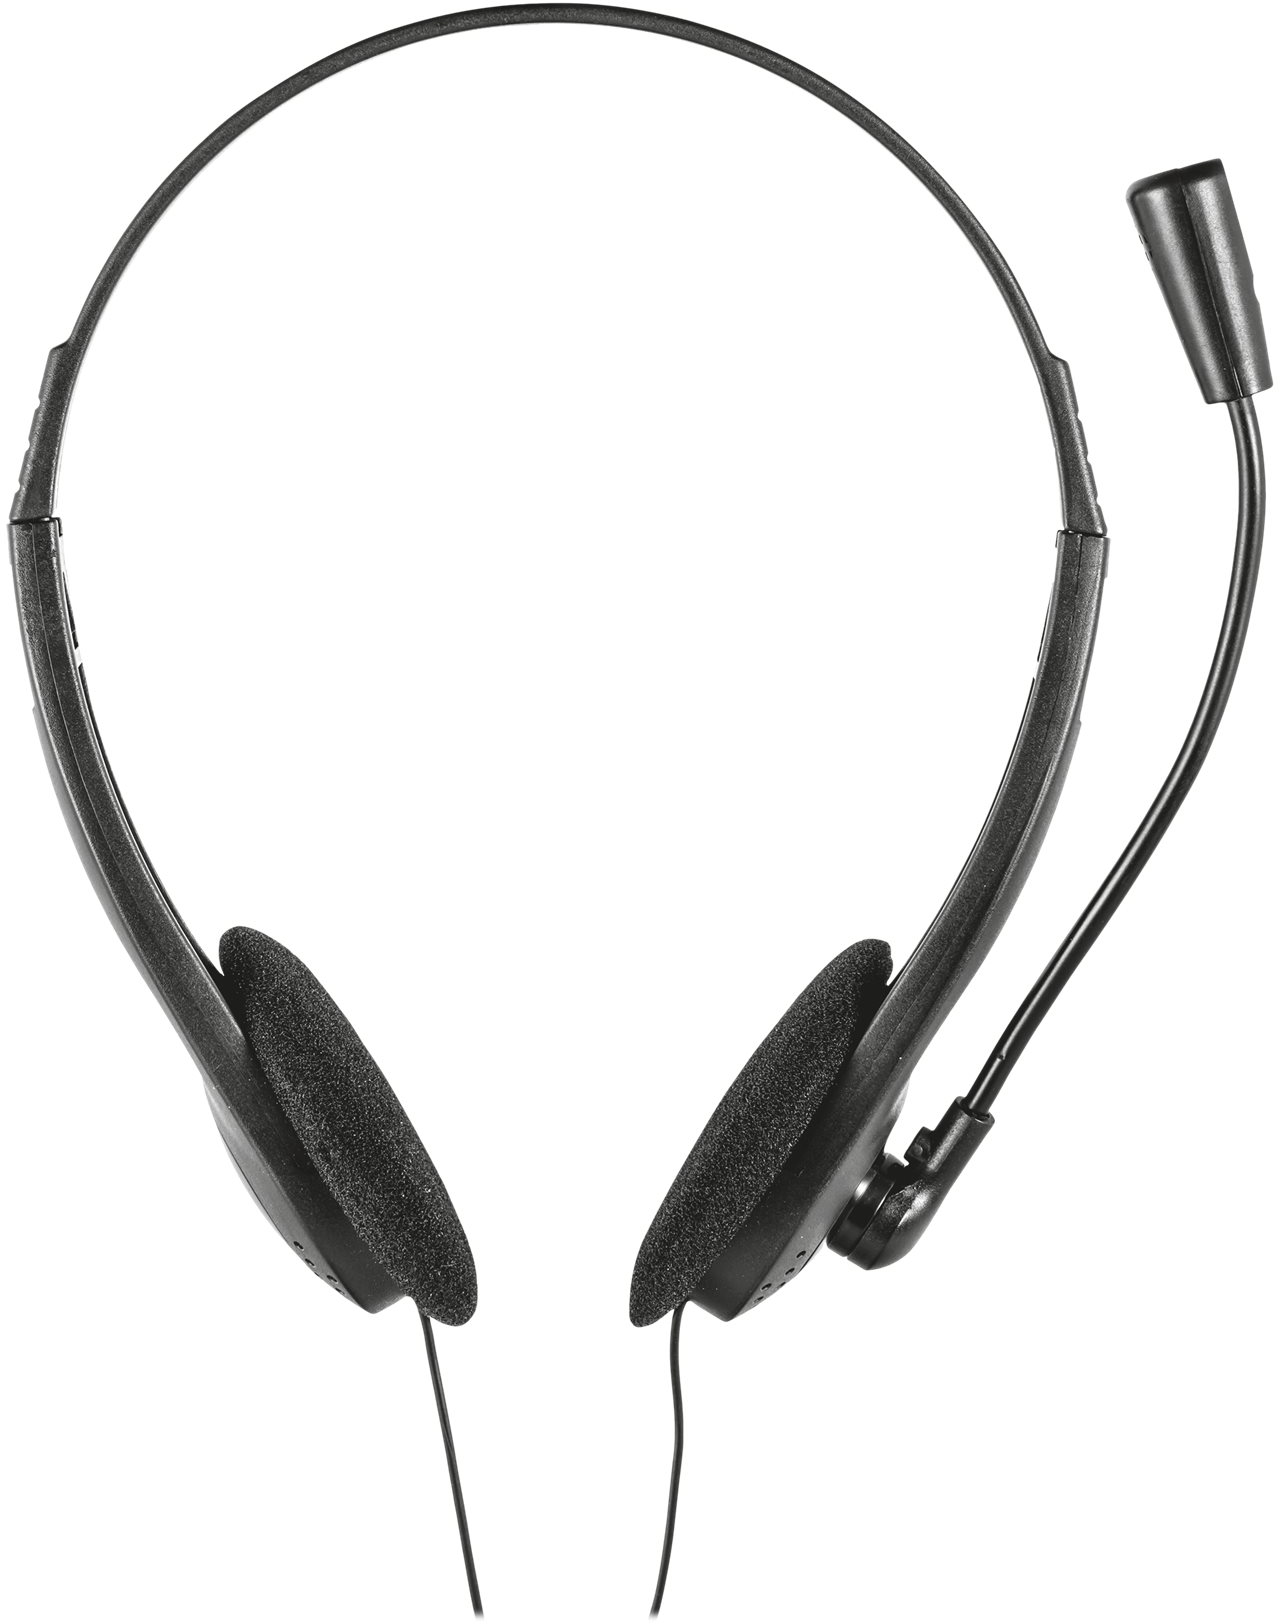 8713439216653 TRUST PRIMO HEADSET - Headset Computer & IT,Tilbehør computer & IT,Headsets 18900004030 21665